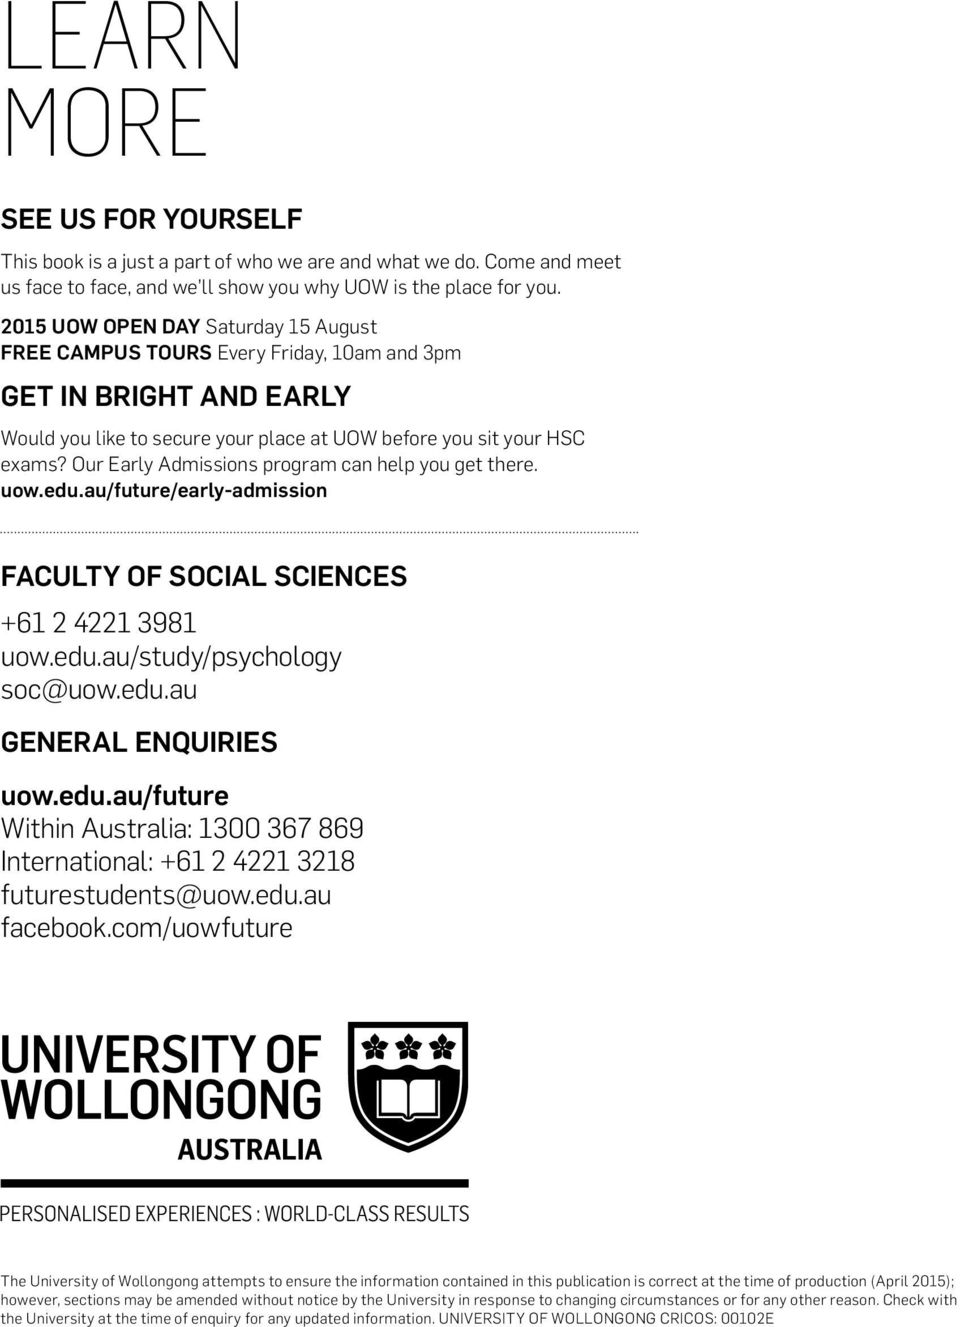 Our Early Admissions program can help you get there. uow.edu.au/future/early-admission FACULTY OF SOCIAL SCIENCES +61 2 4221 3981 uow.edu.au/study/psychology soc@uow.edu.au GENERAL ENQUIRIES uow.edu.au/future Within Australia: 1300 367 869 International: +61 2 4221 3218 futurestudents@uow.